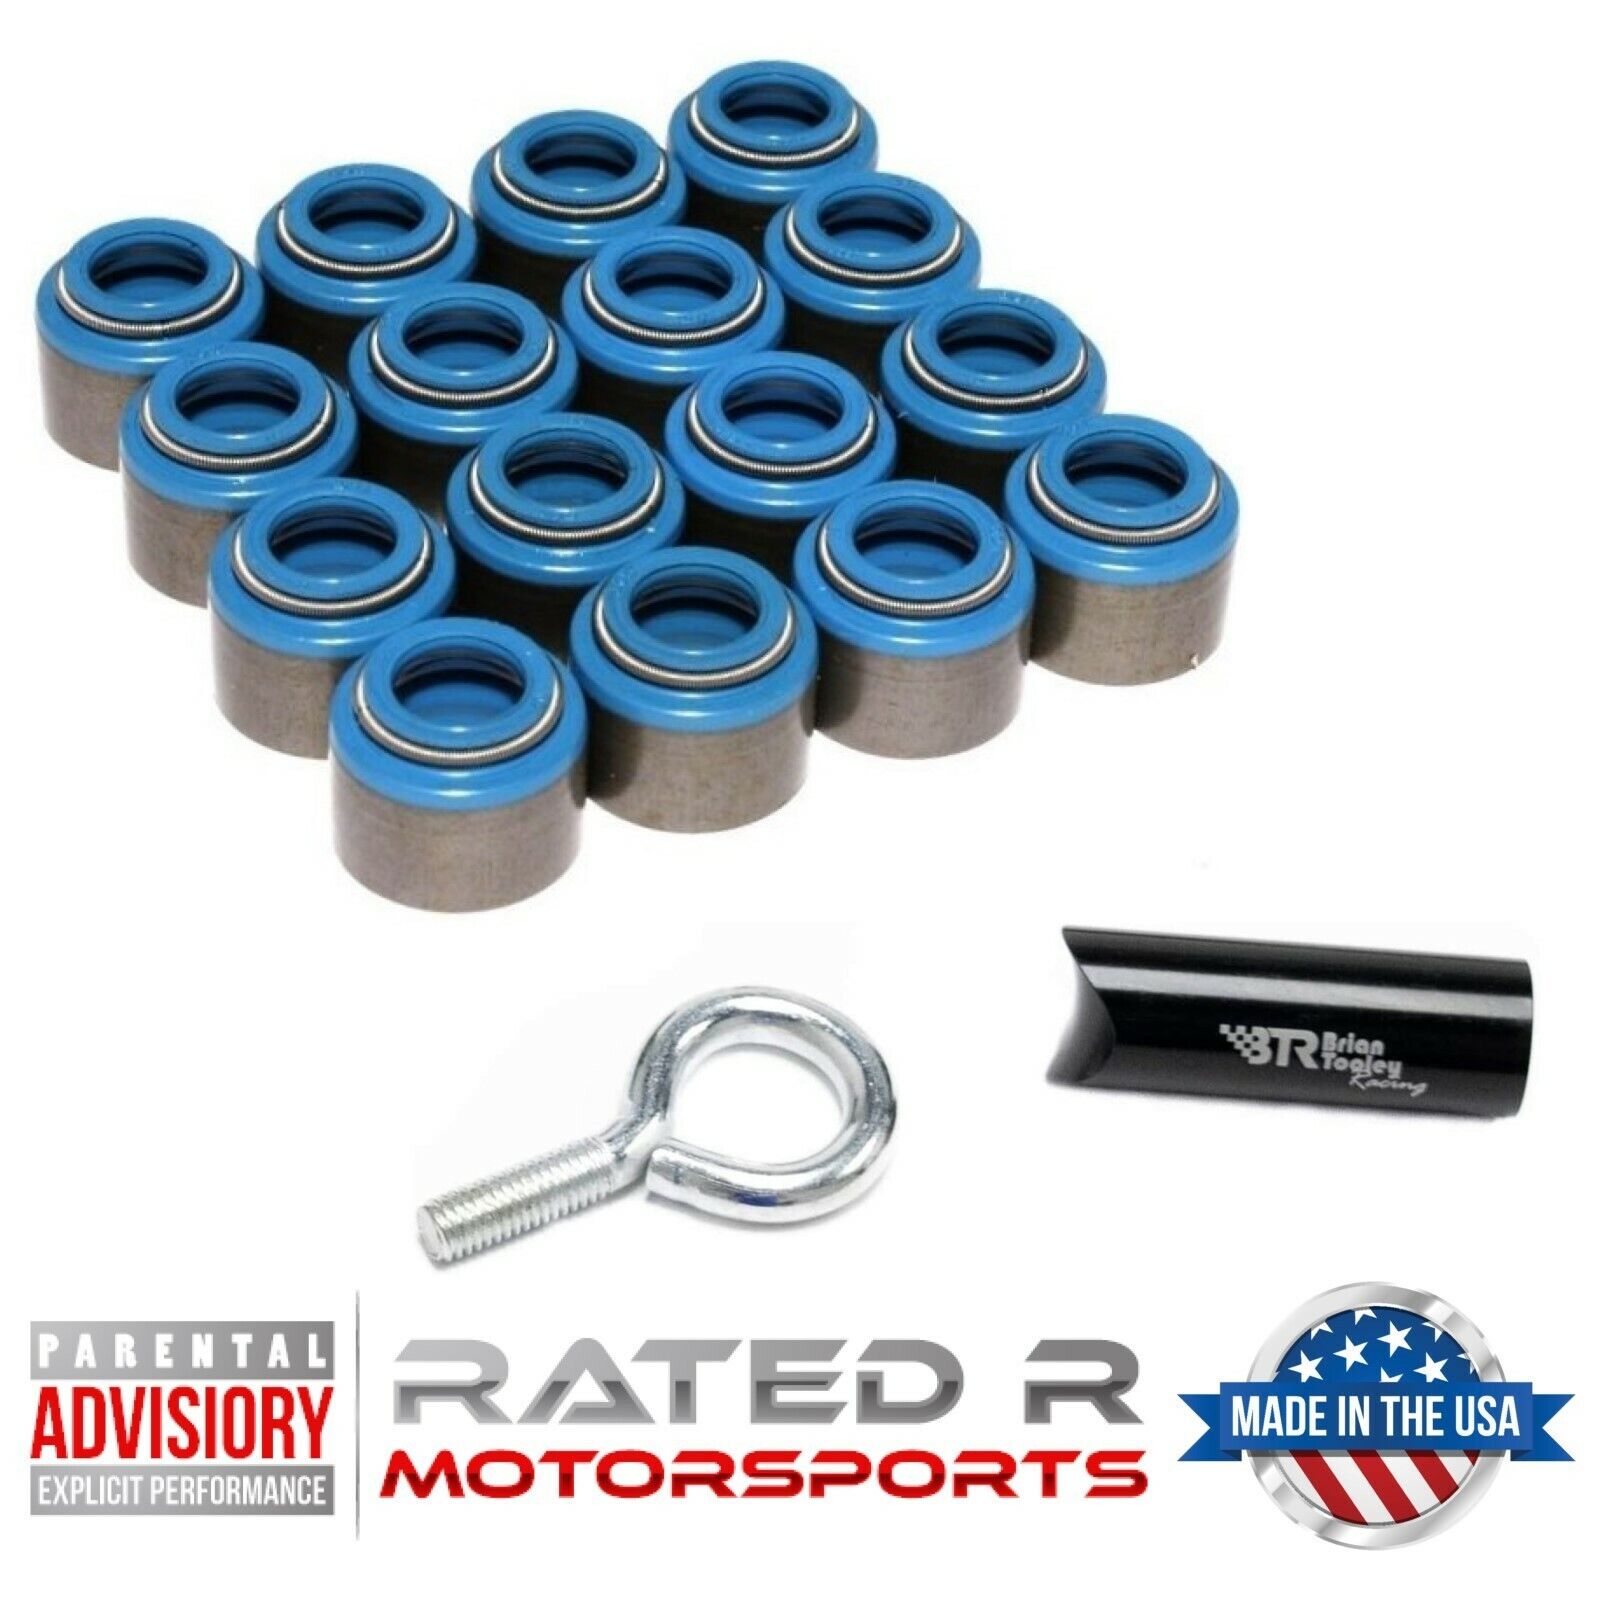 BTR LS Intake Exhaust Blue Valve Seal Kit Set of 16 With Valve Seal Install Tool